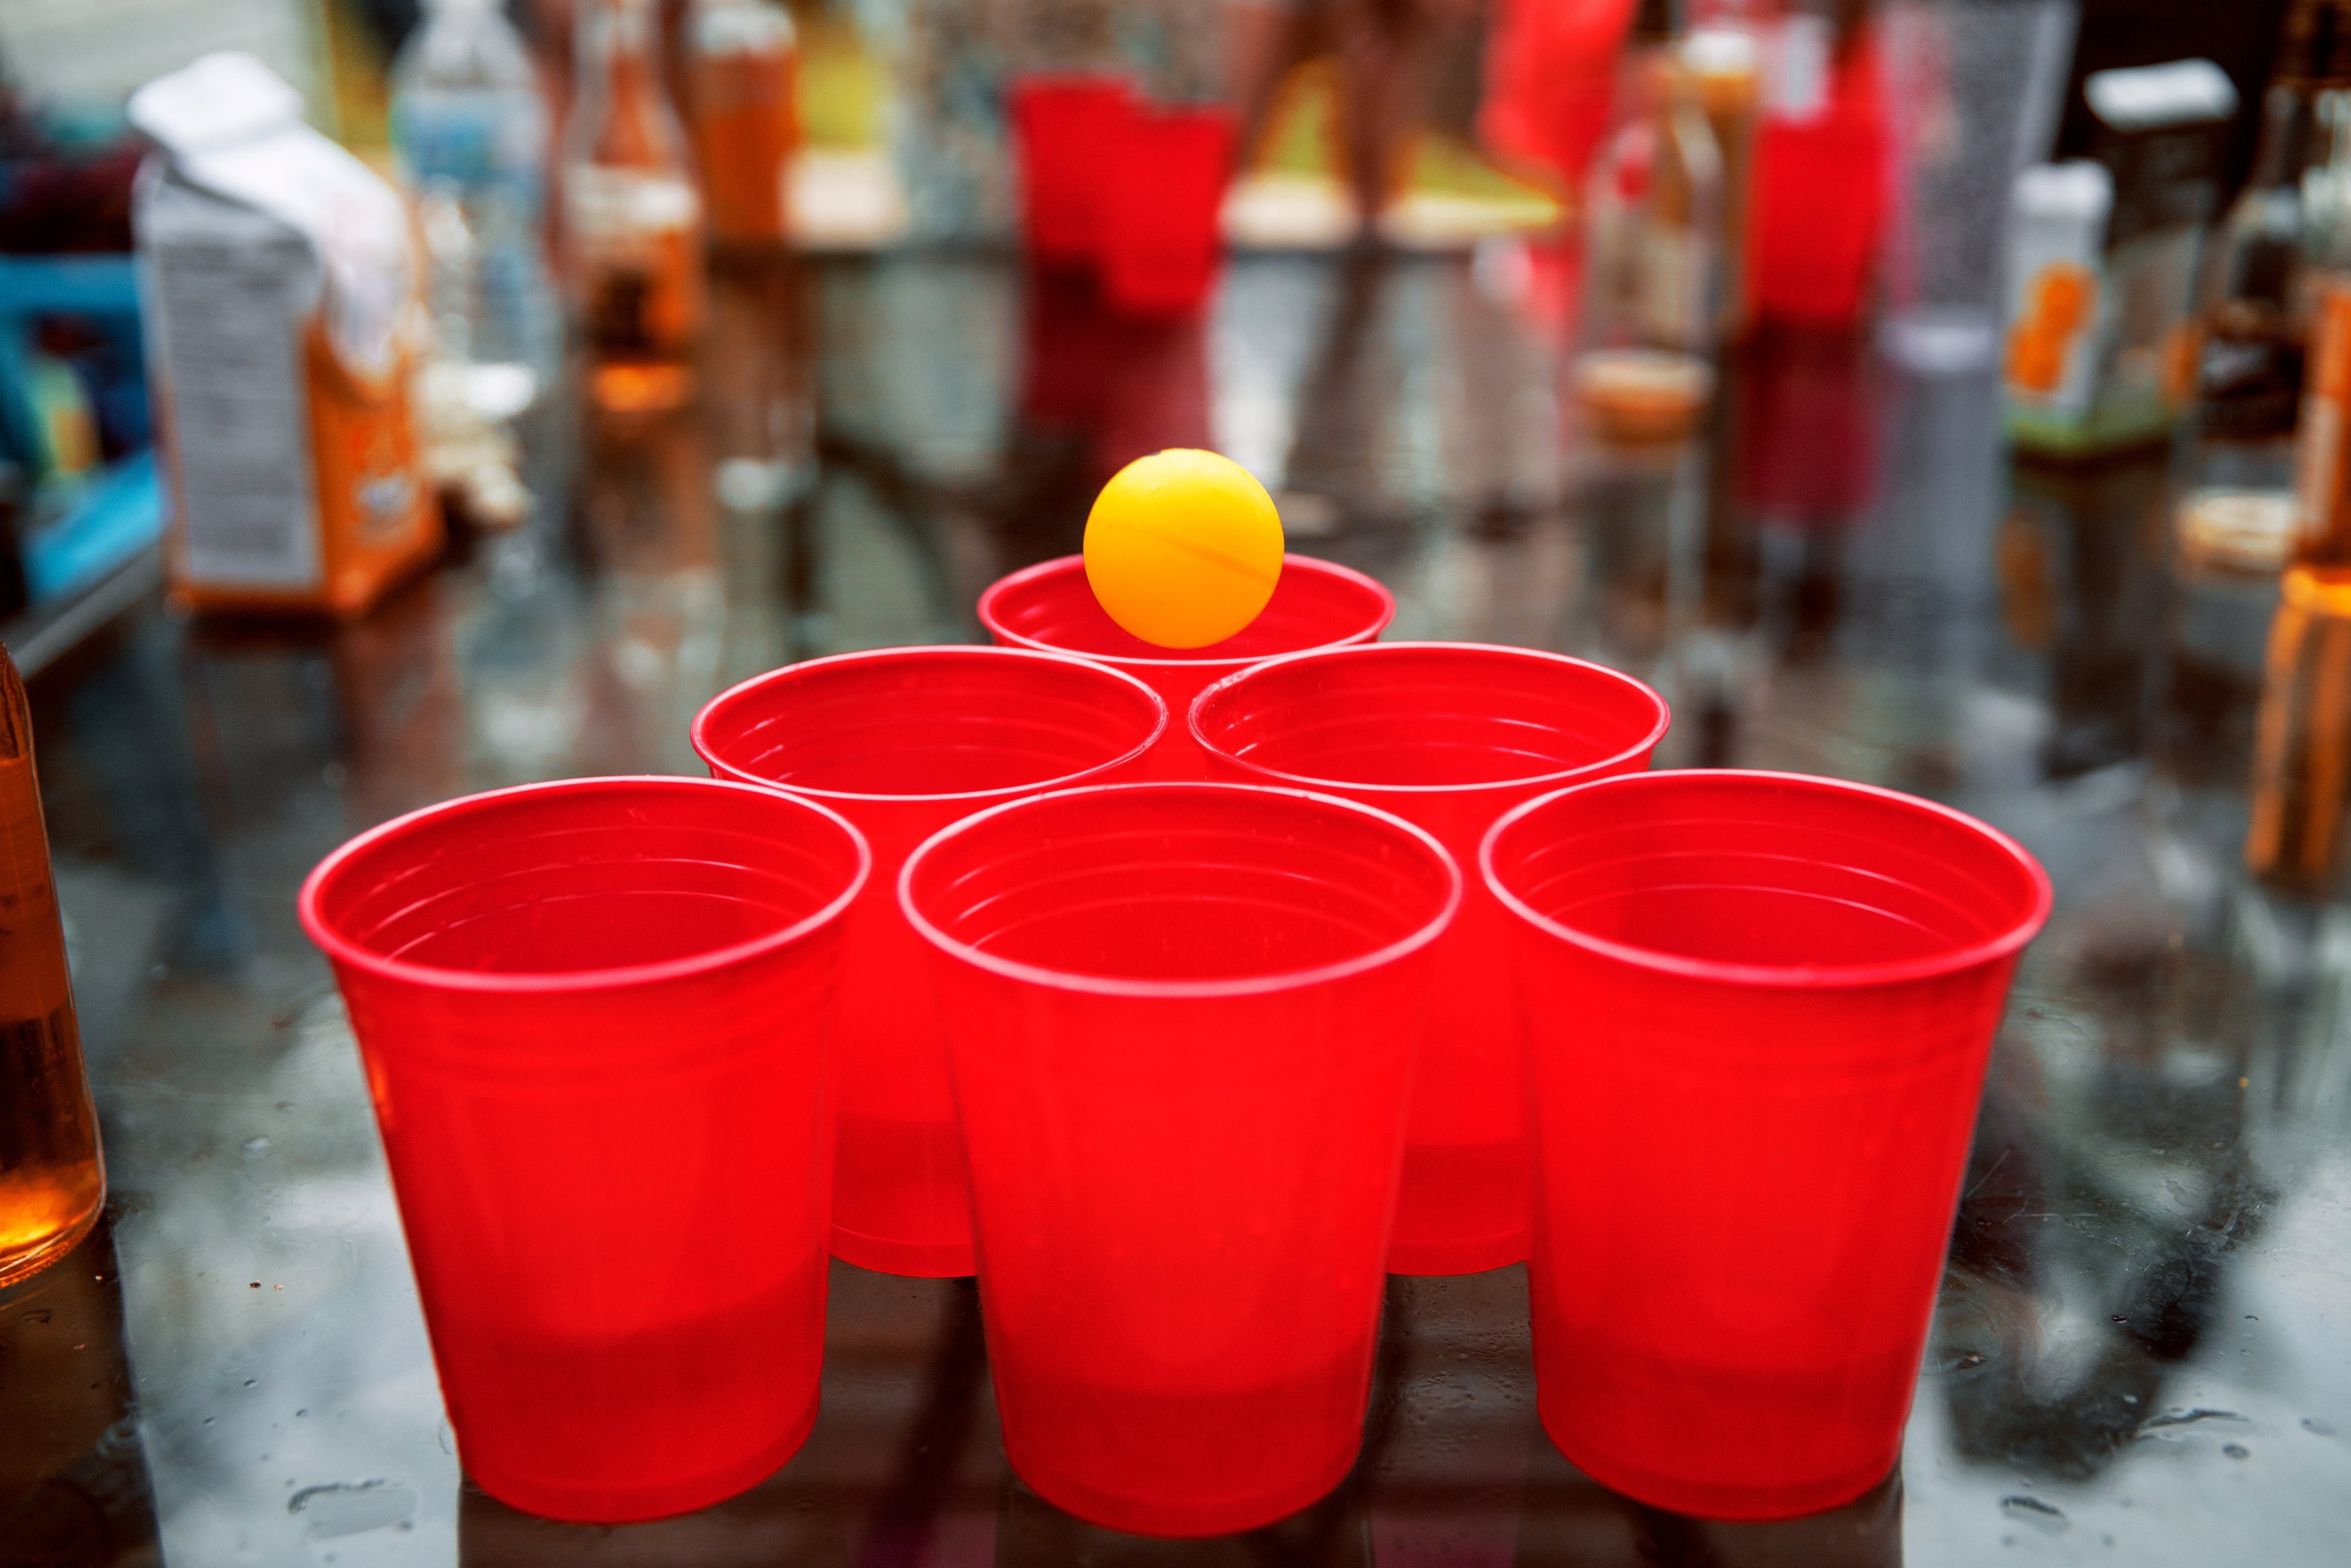 A table set to play beer pong. | Photo: Pexels